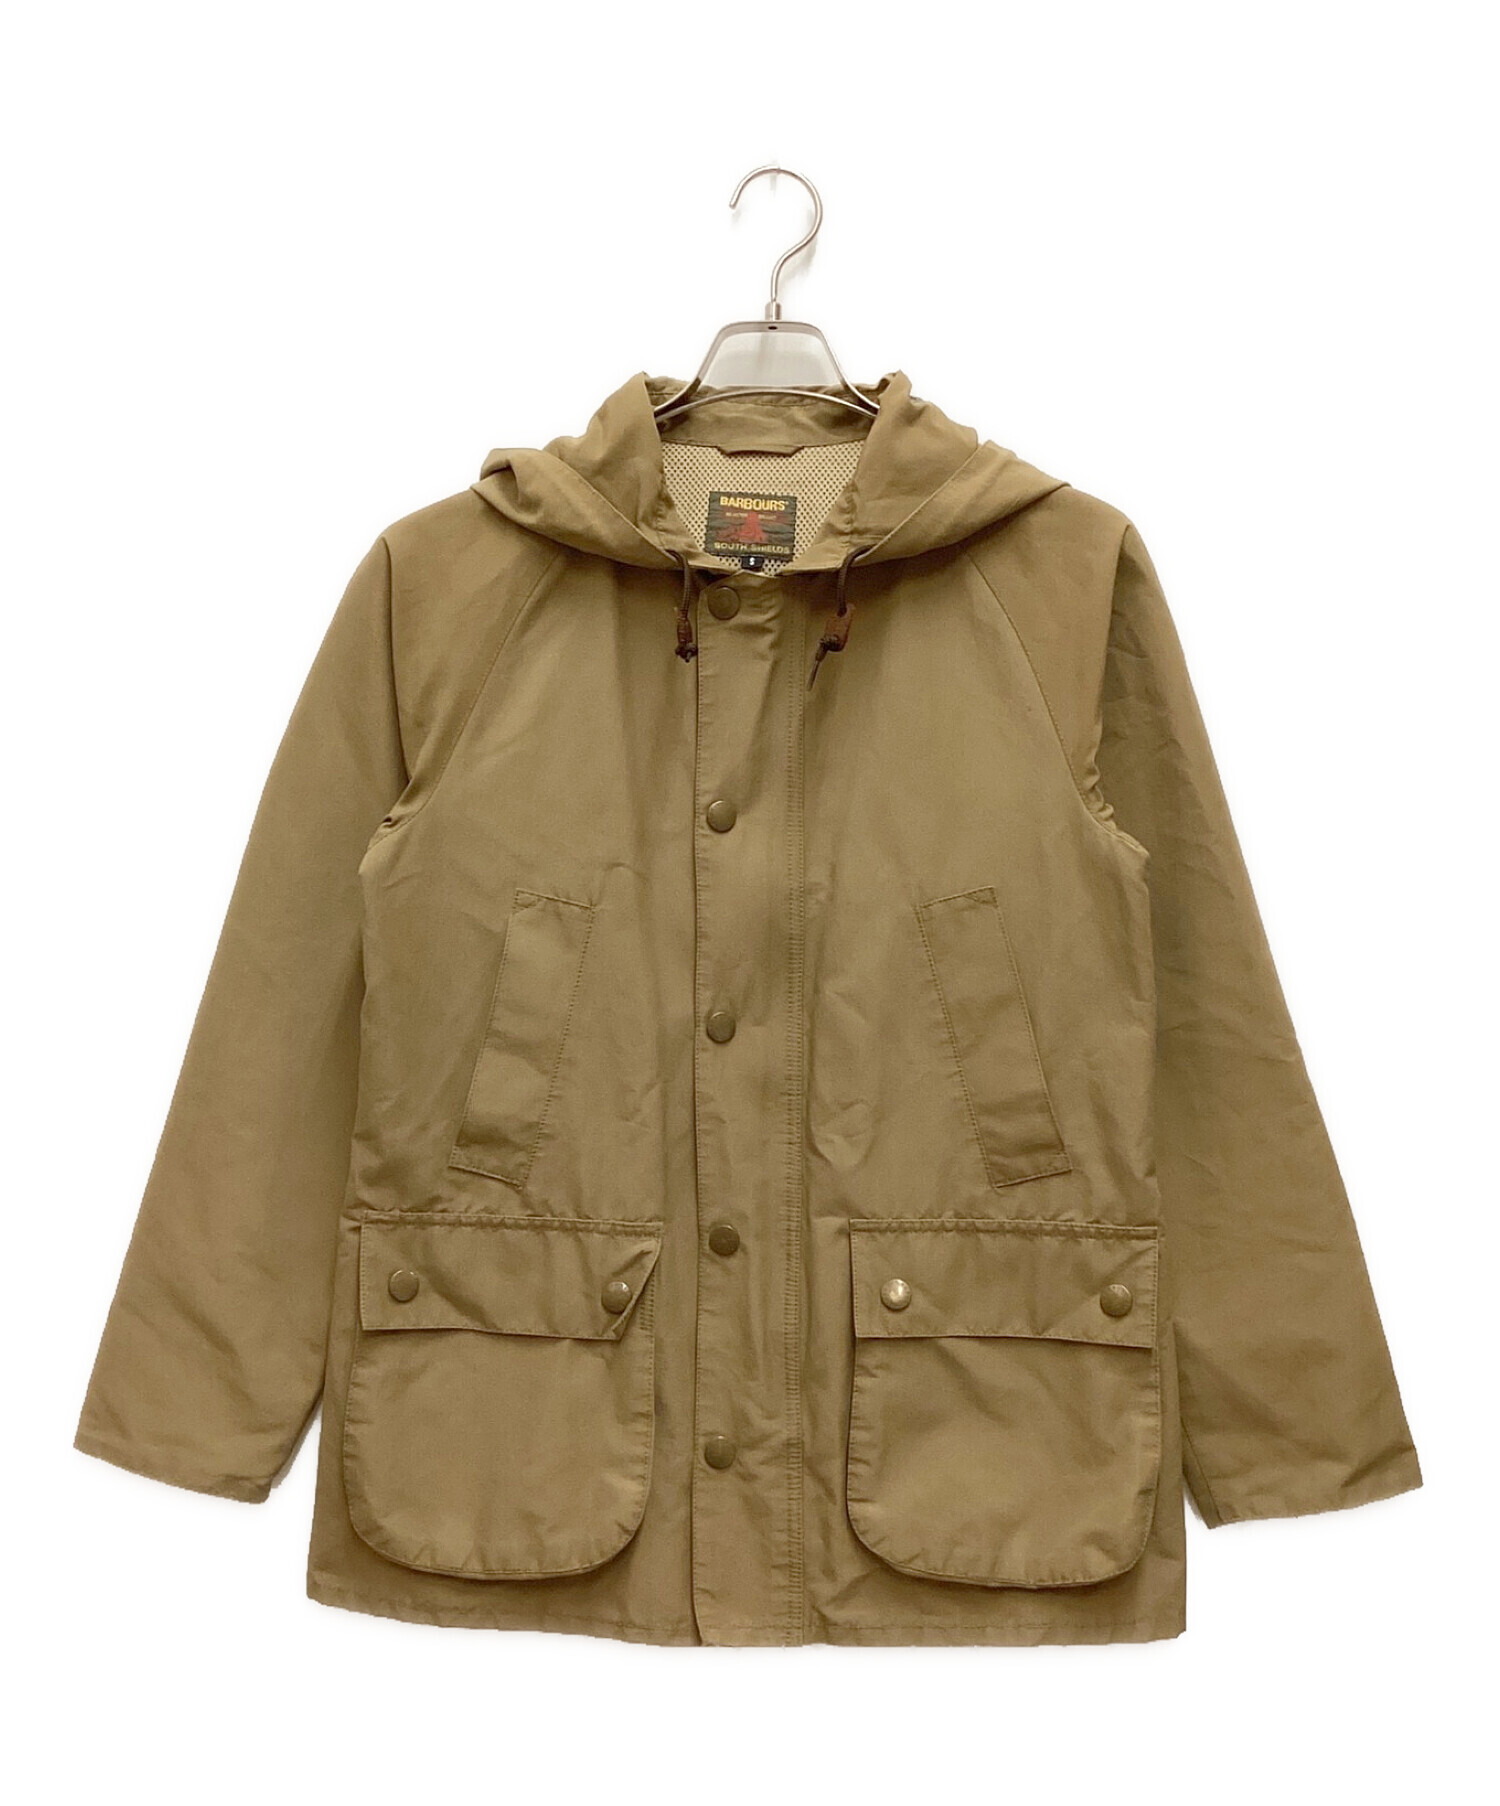 Barbour x BEAMS (バブアー×ビームス) 60/40 HOODED BEDALE SL ブラウン サイズ:S